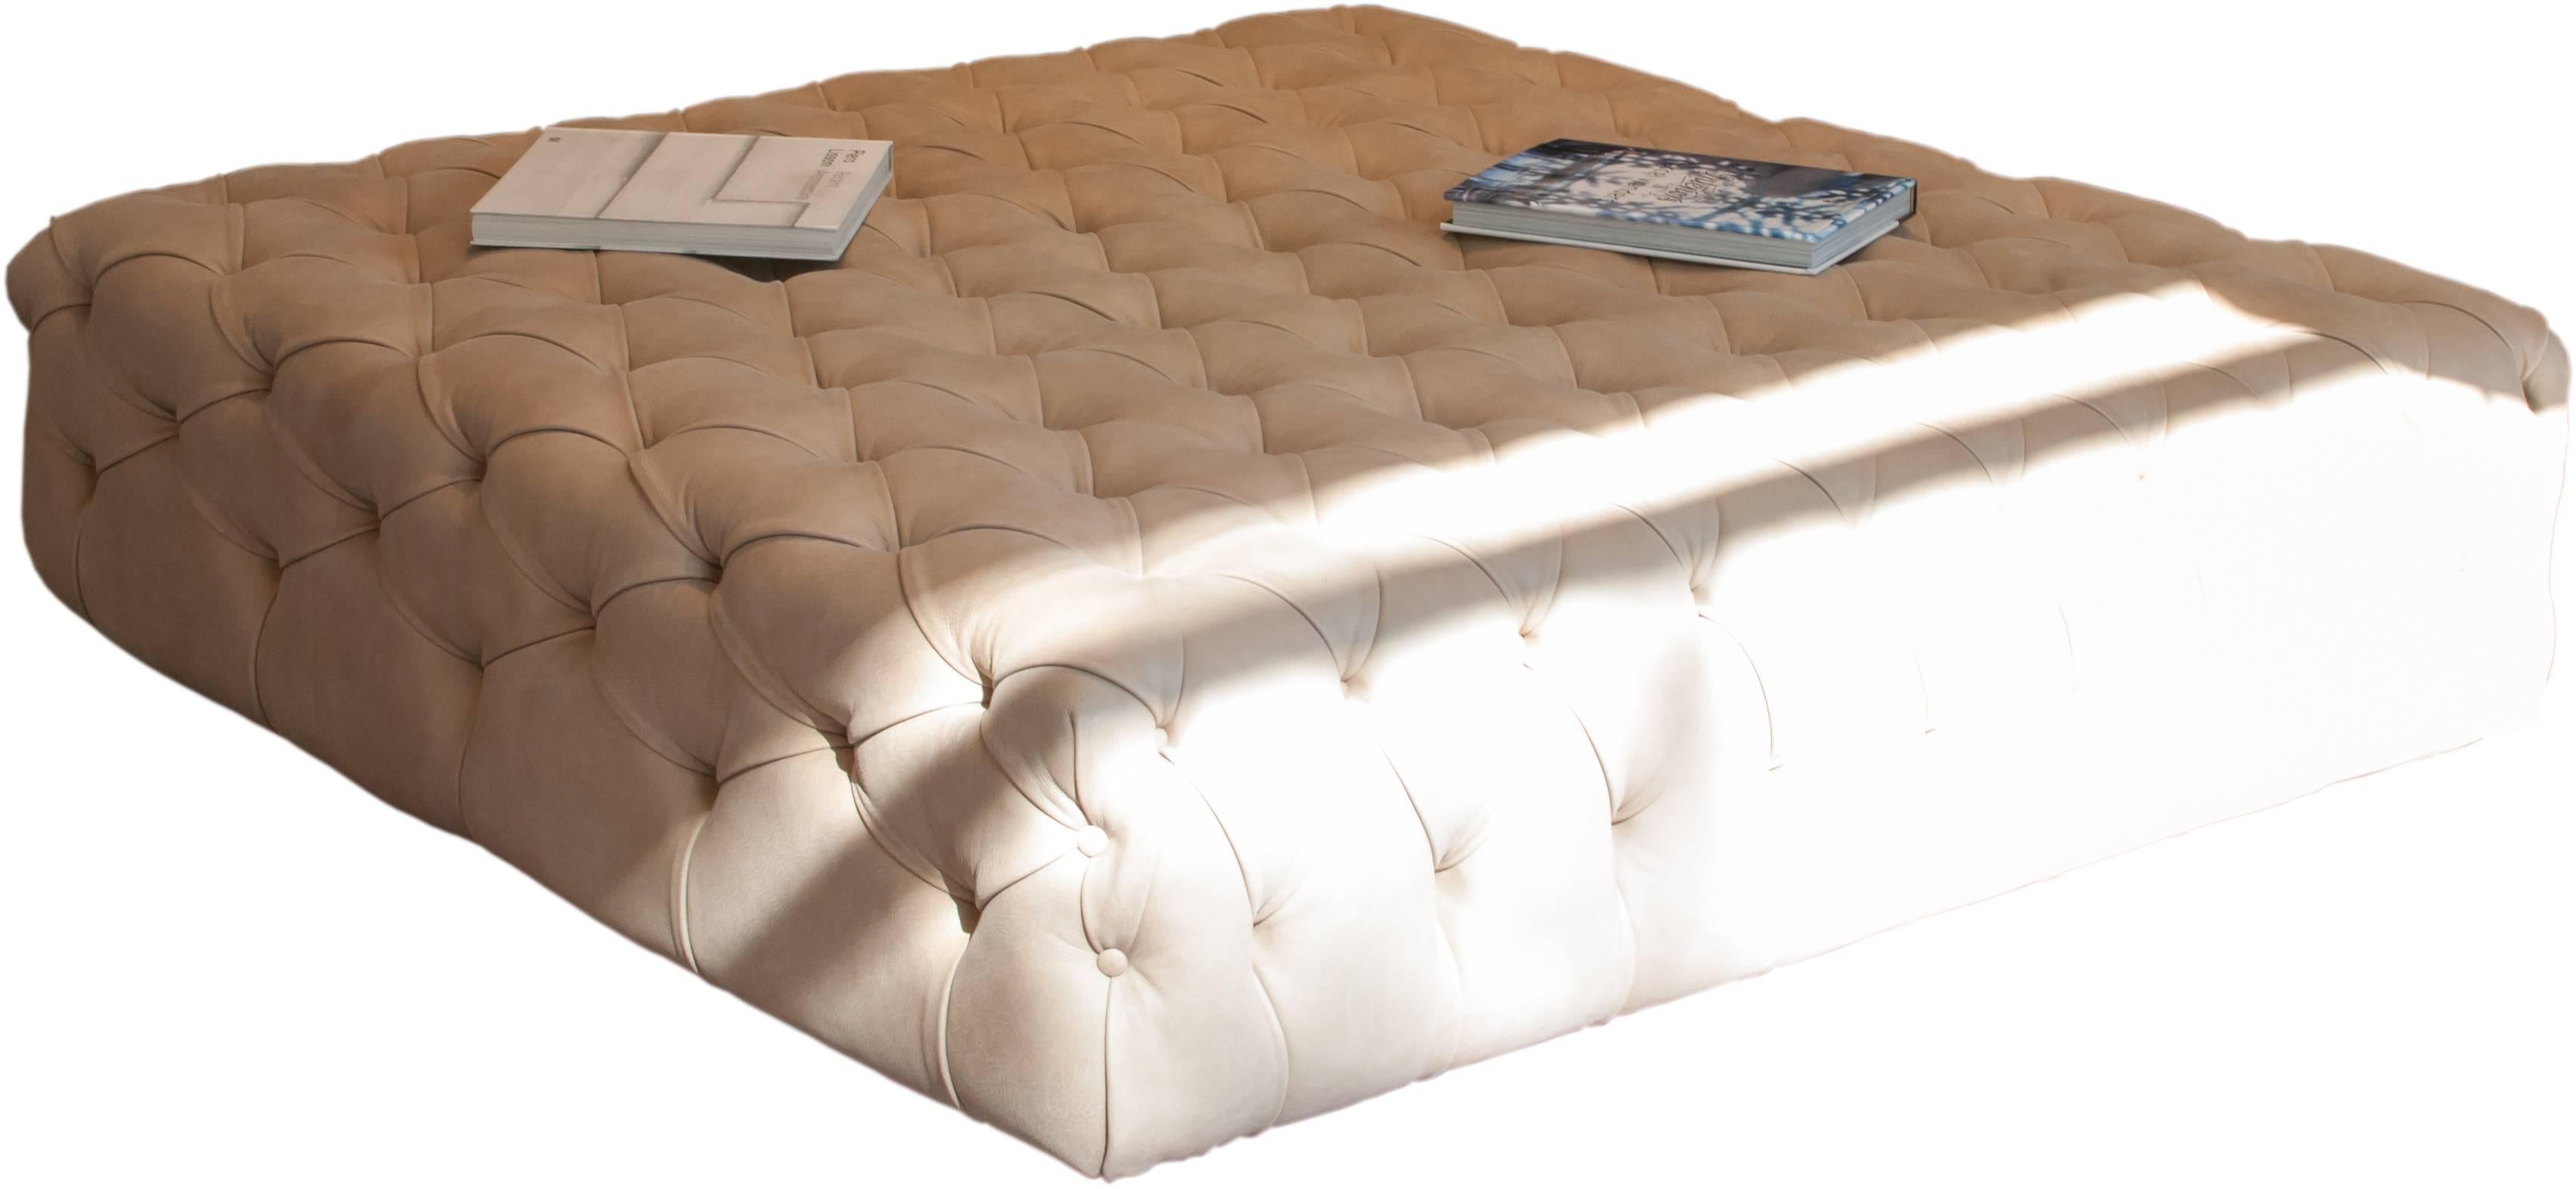 Wooden frame, padding in polyurethane foam. Non-removable covering in fabric or leather button tufting. Base in wood.